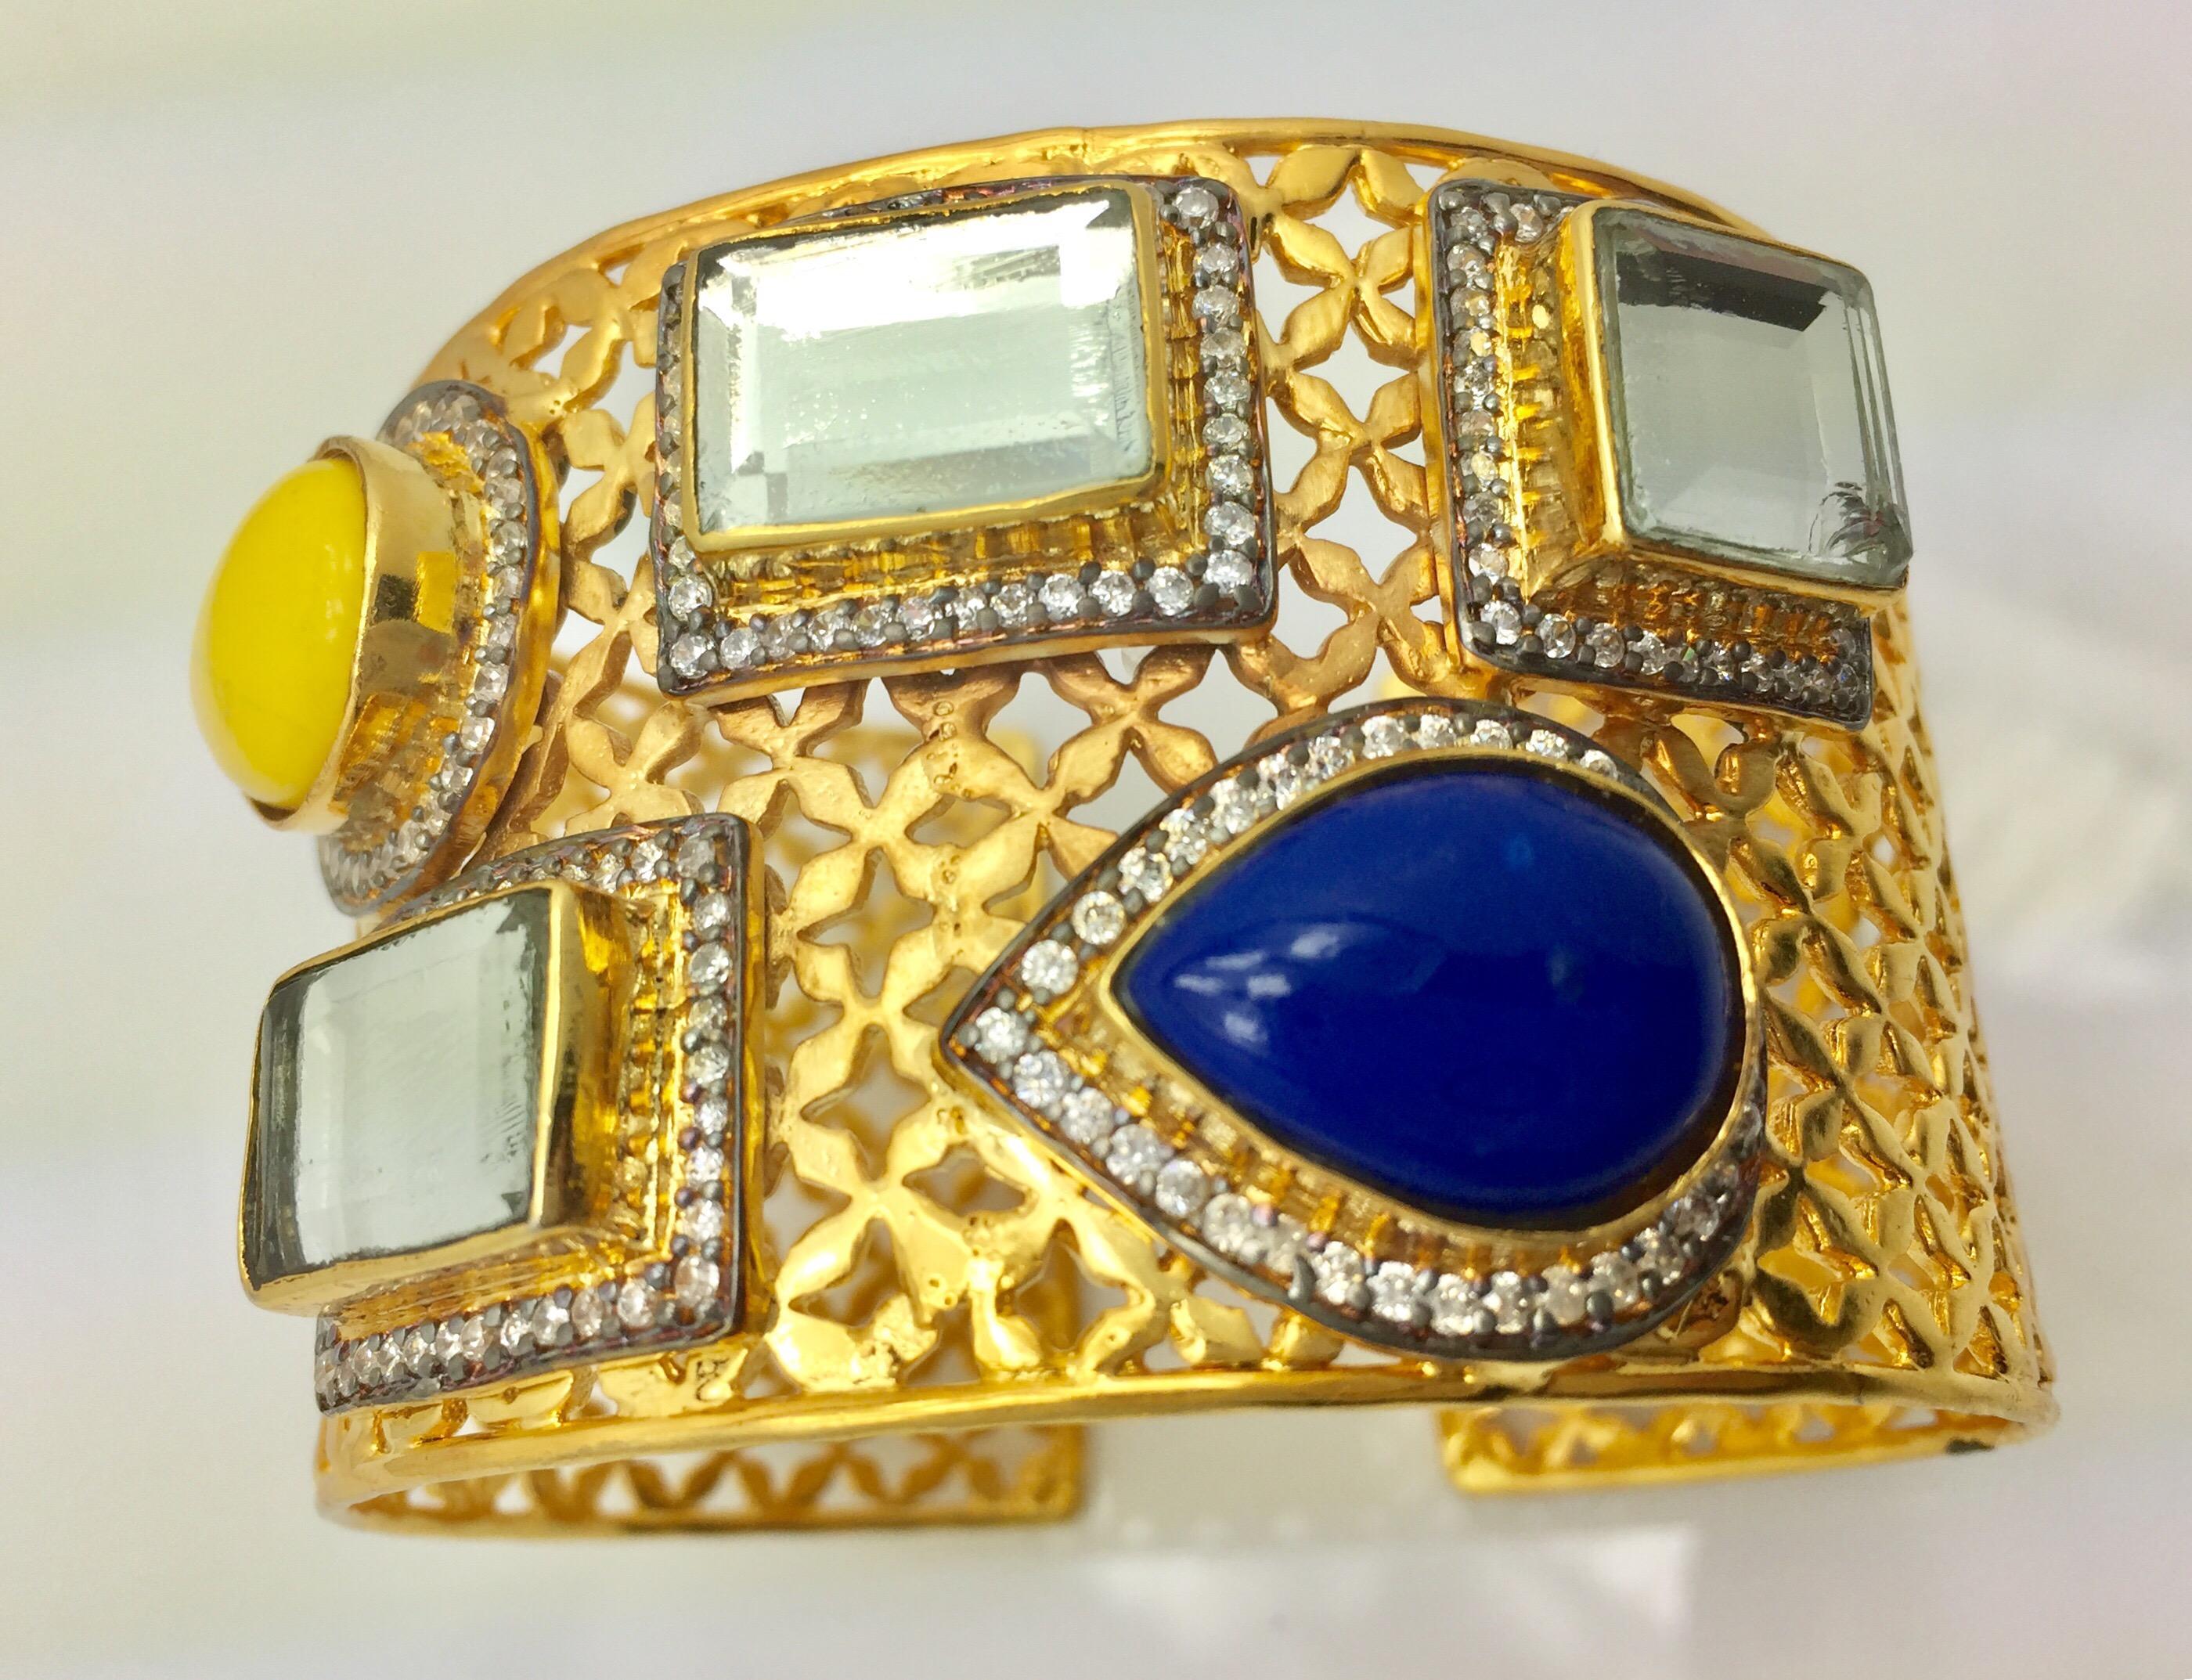 A gold frame becomes a gleaming backdrop for the brightly colored blue and yellow teardrop resin stones, enhanced with light reflecting mirror stones. The statement cuff is an attention commanding finishing touch you will treasure, and is slightly